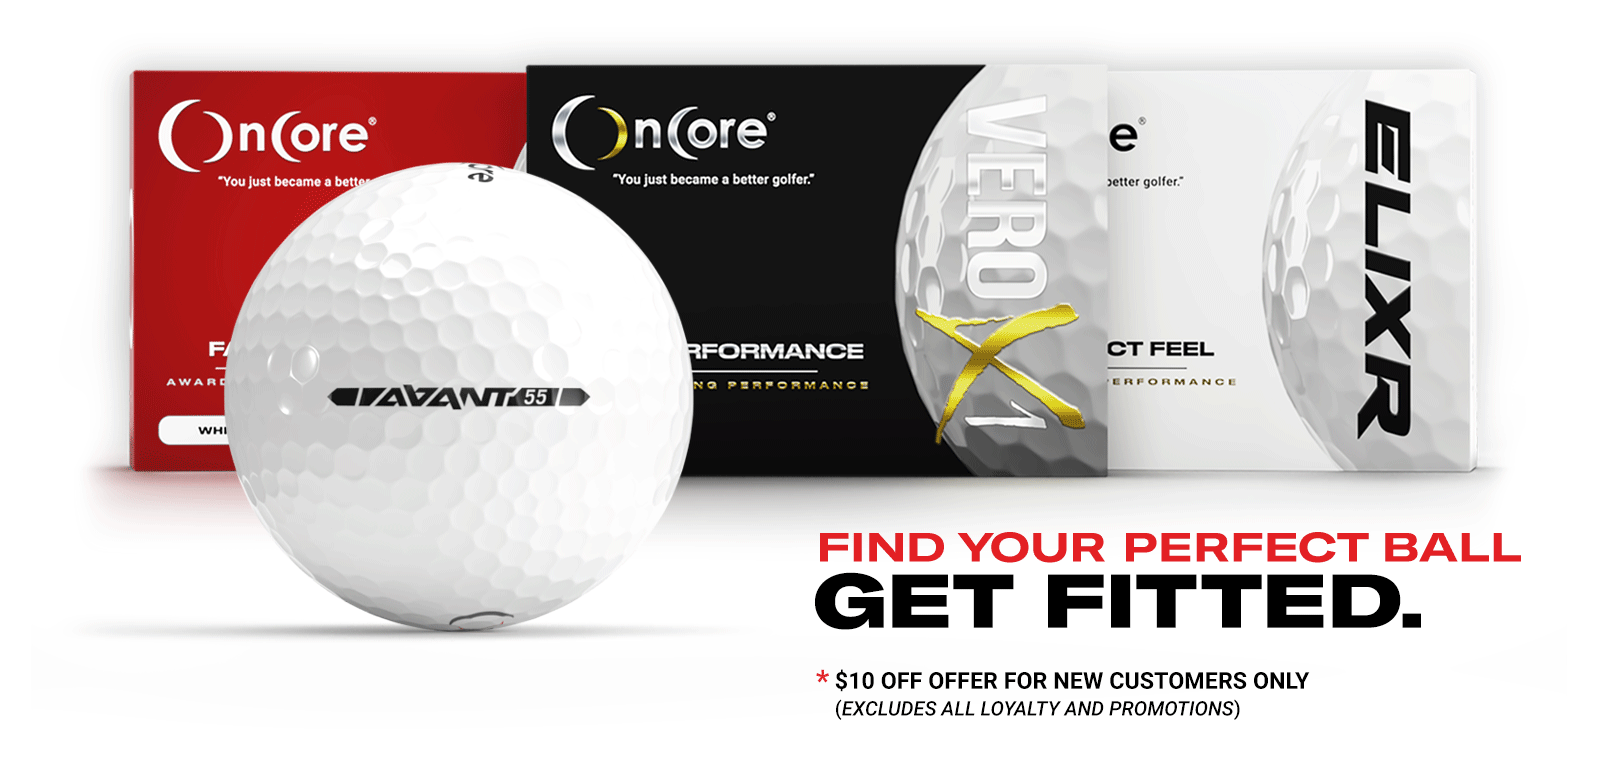 Ball Fitting From OnCore Golf - New Customers Get $10 OnCore Cash